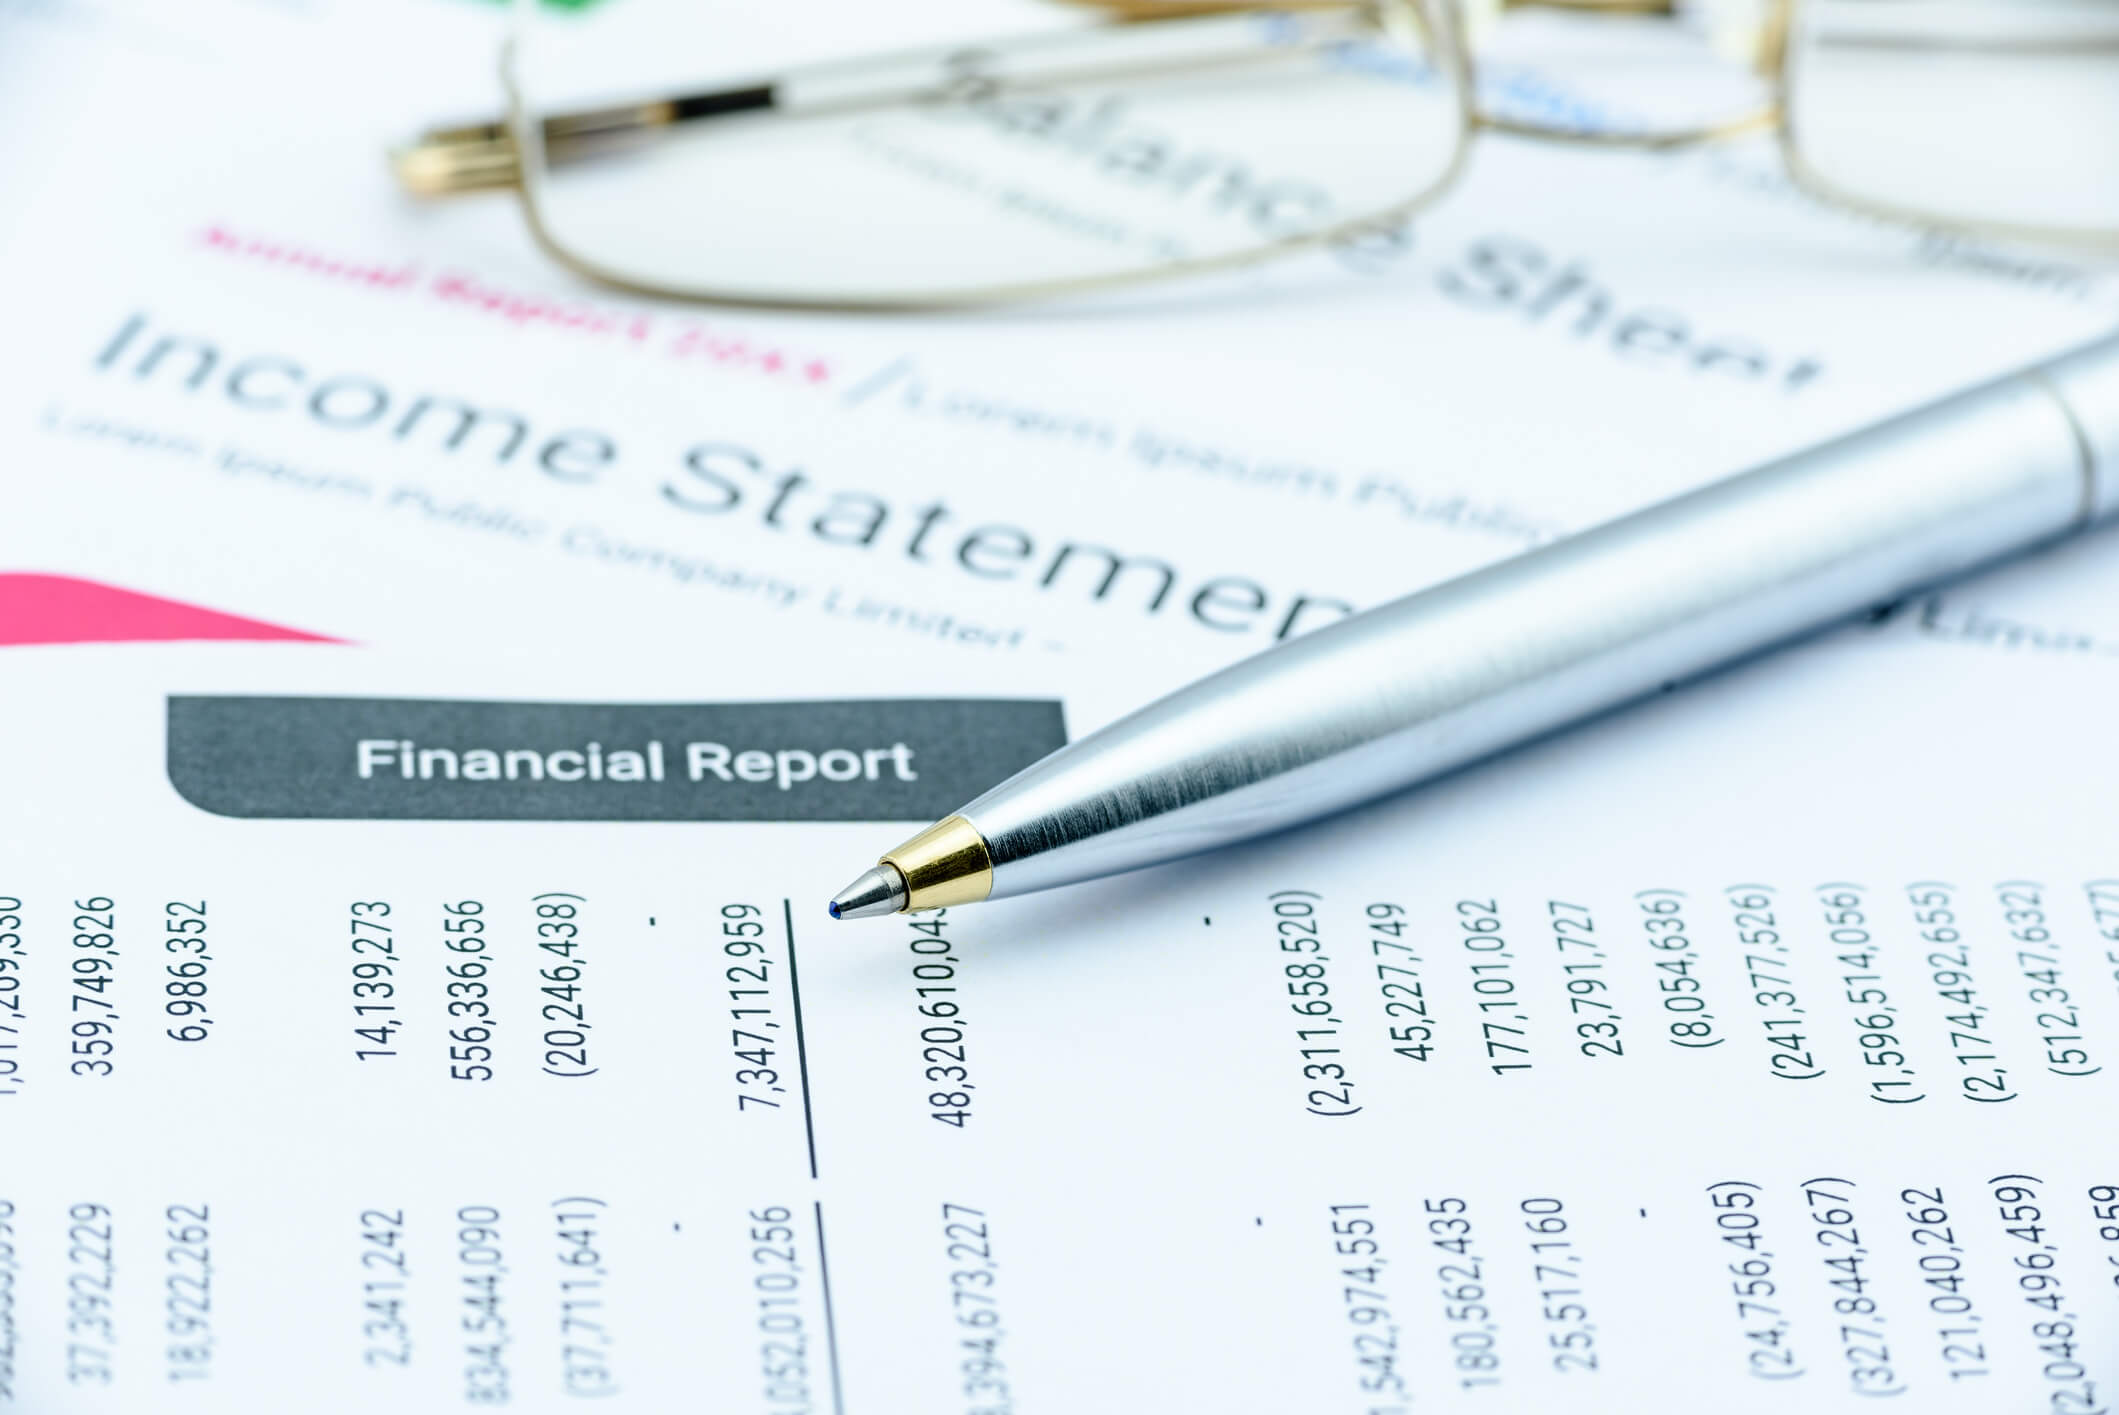 How to Understand the Financial Statement: An Entrepreneur’s Guide